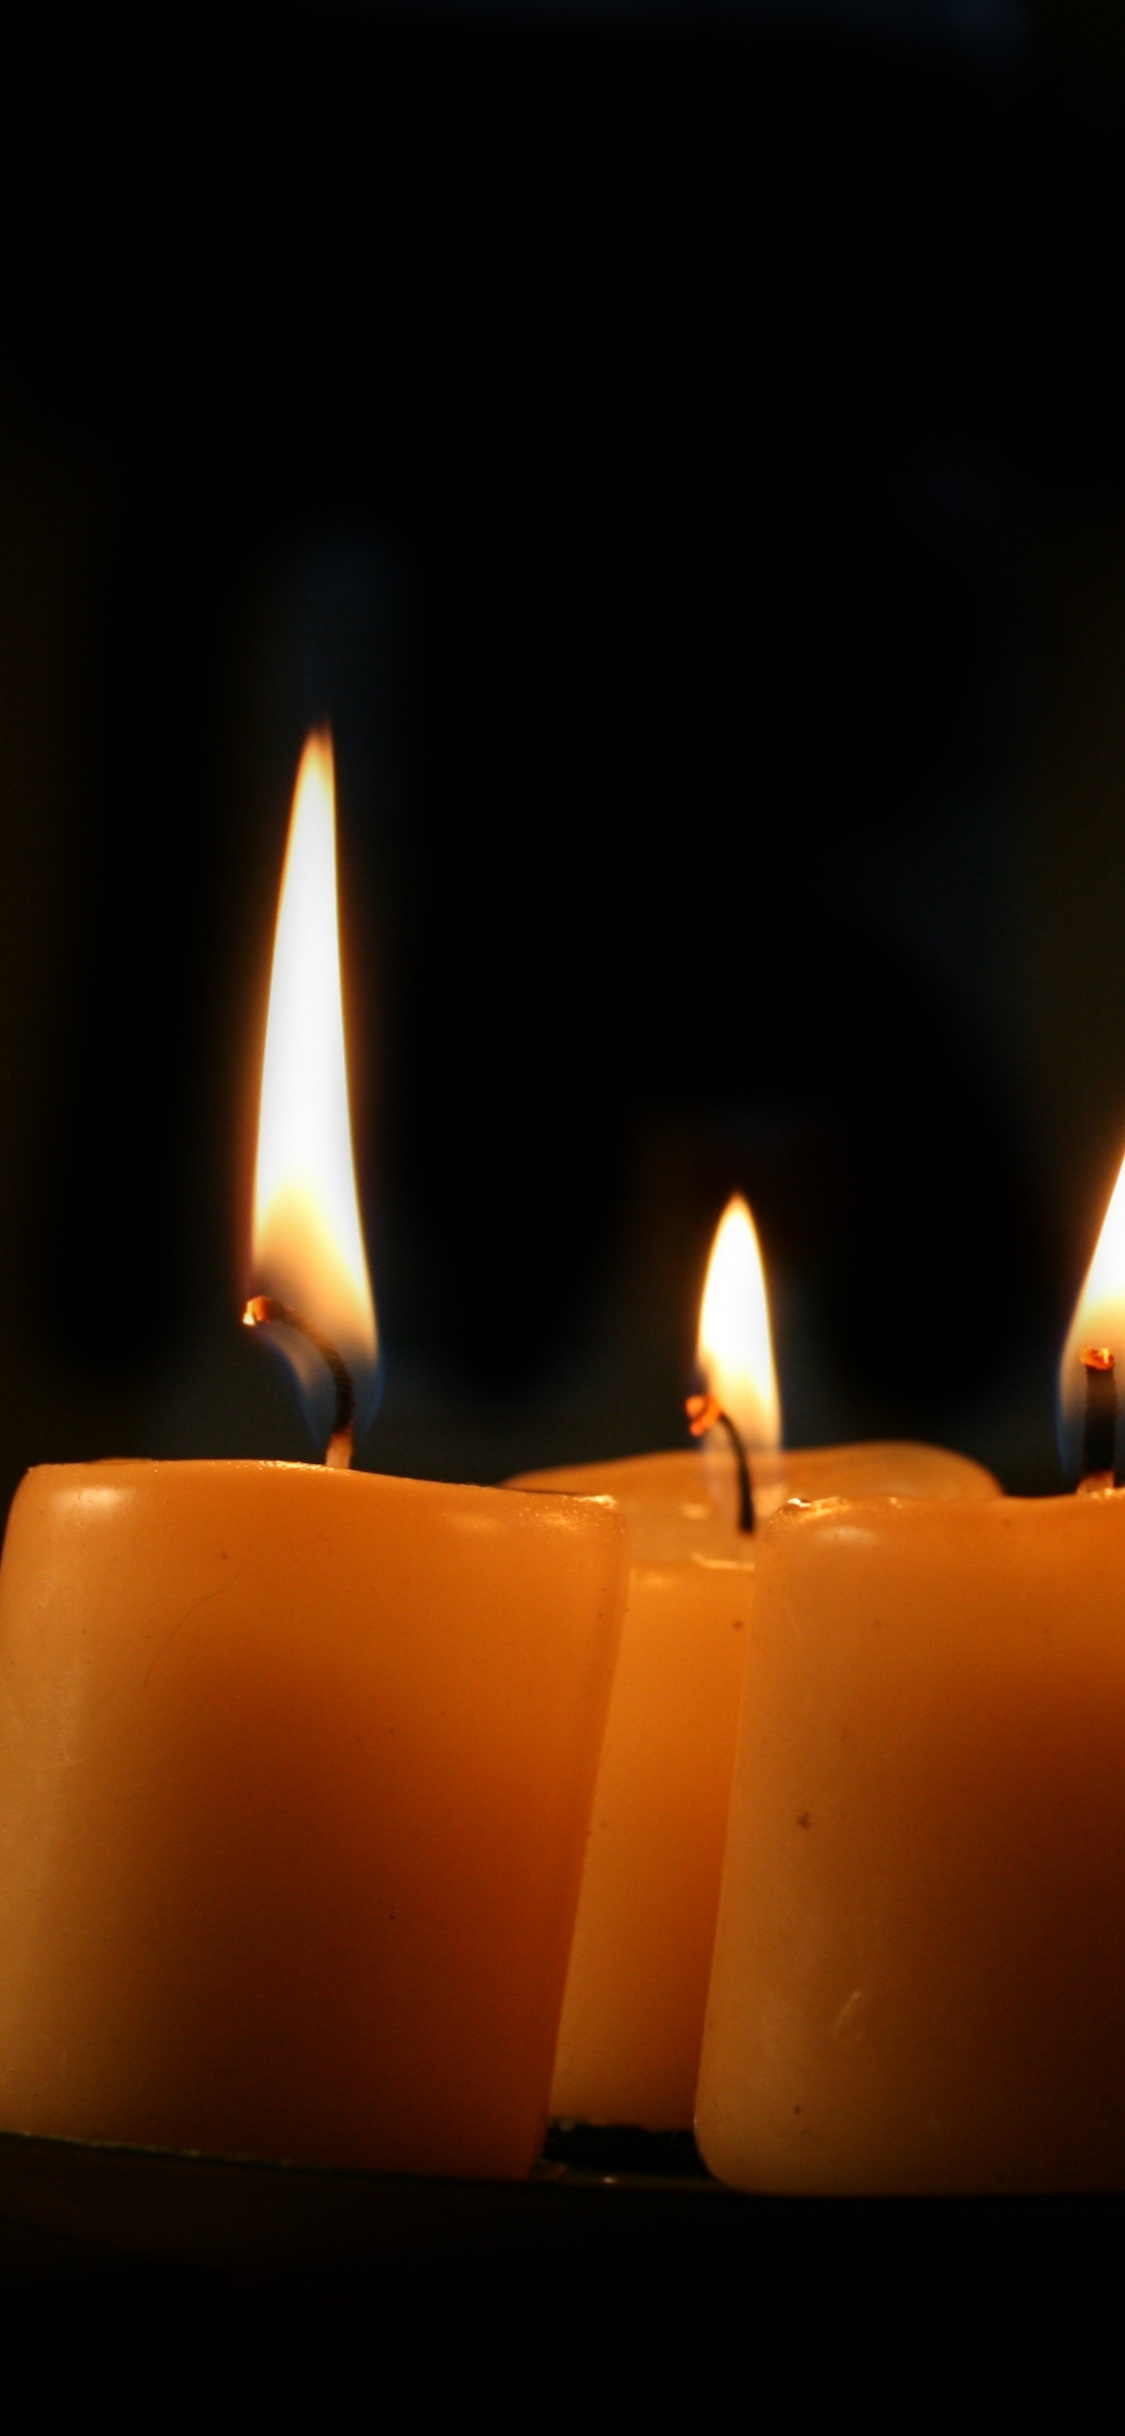 3 Lighted Candles on Black Background. Wallpaper in 1125x2436 Resolution